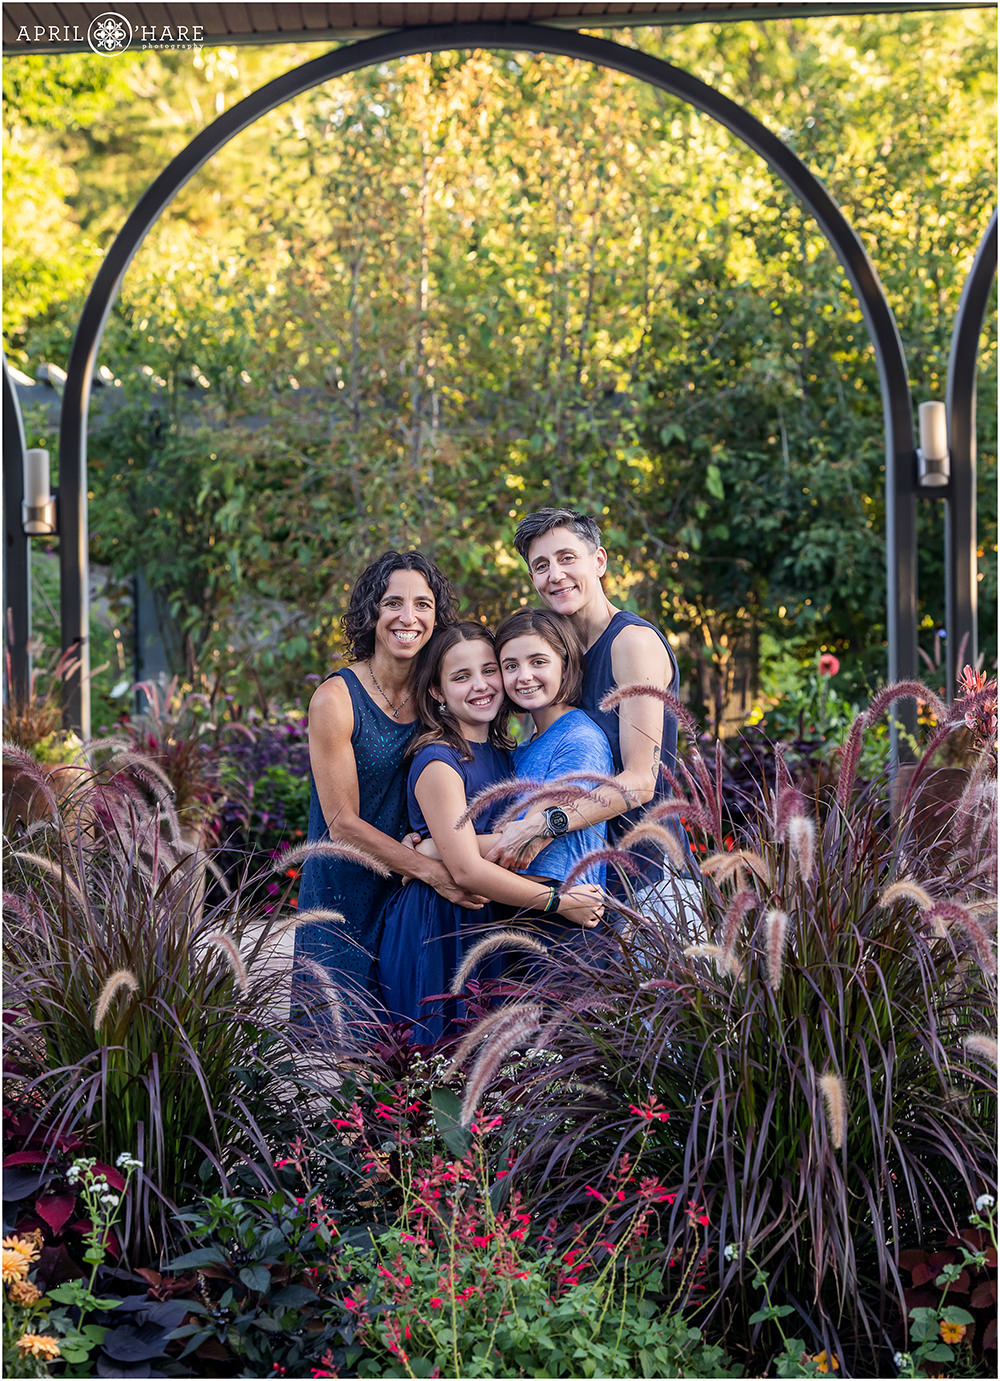 Cute family with two daughters under an arch at Denver Botanic Gardens